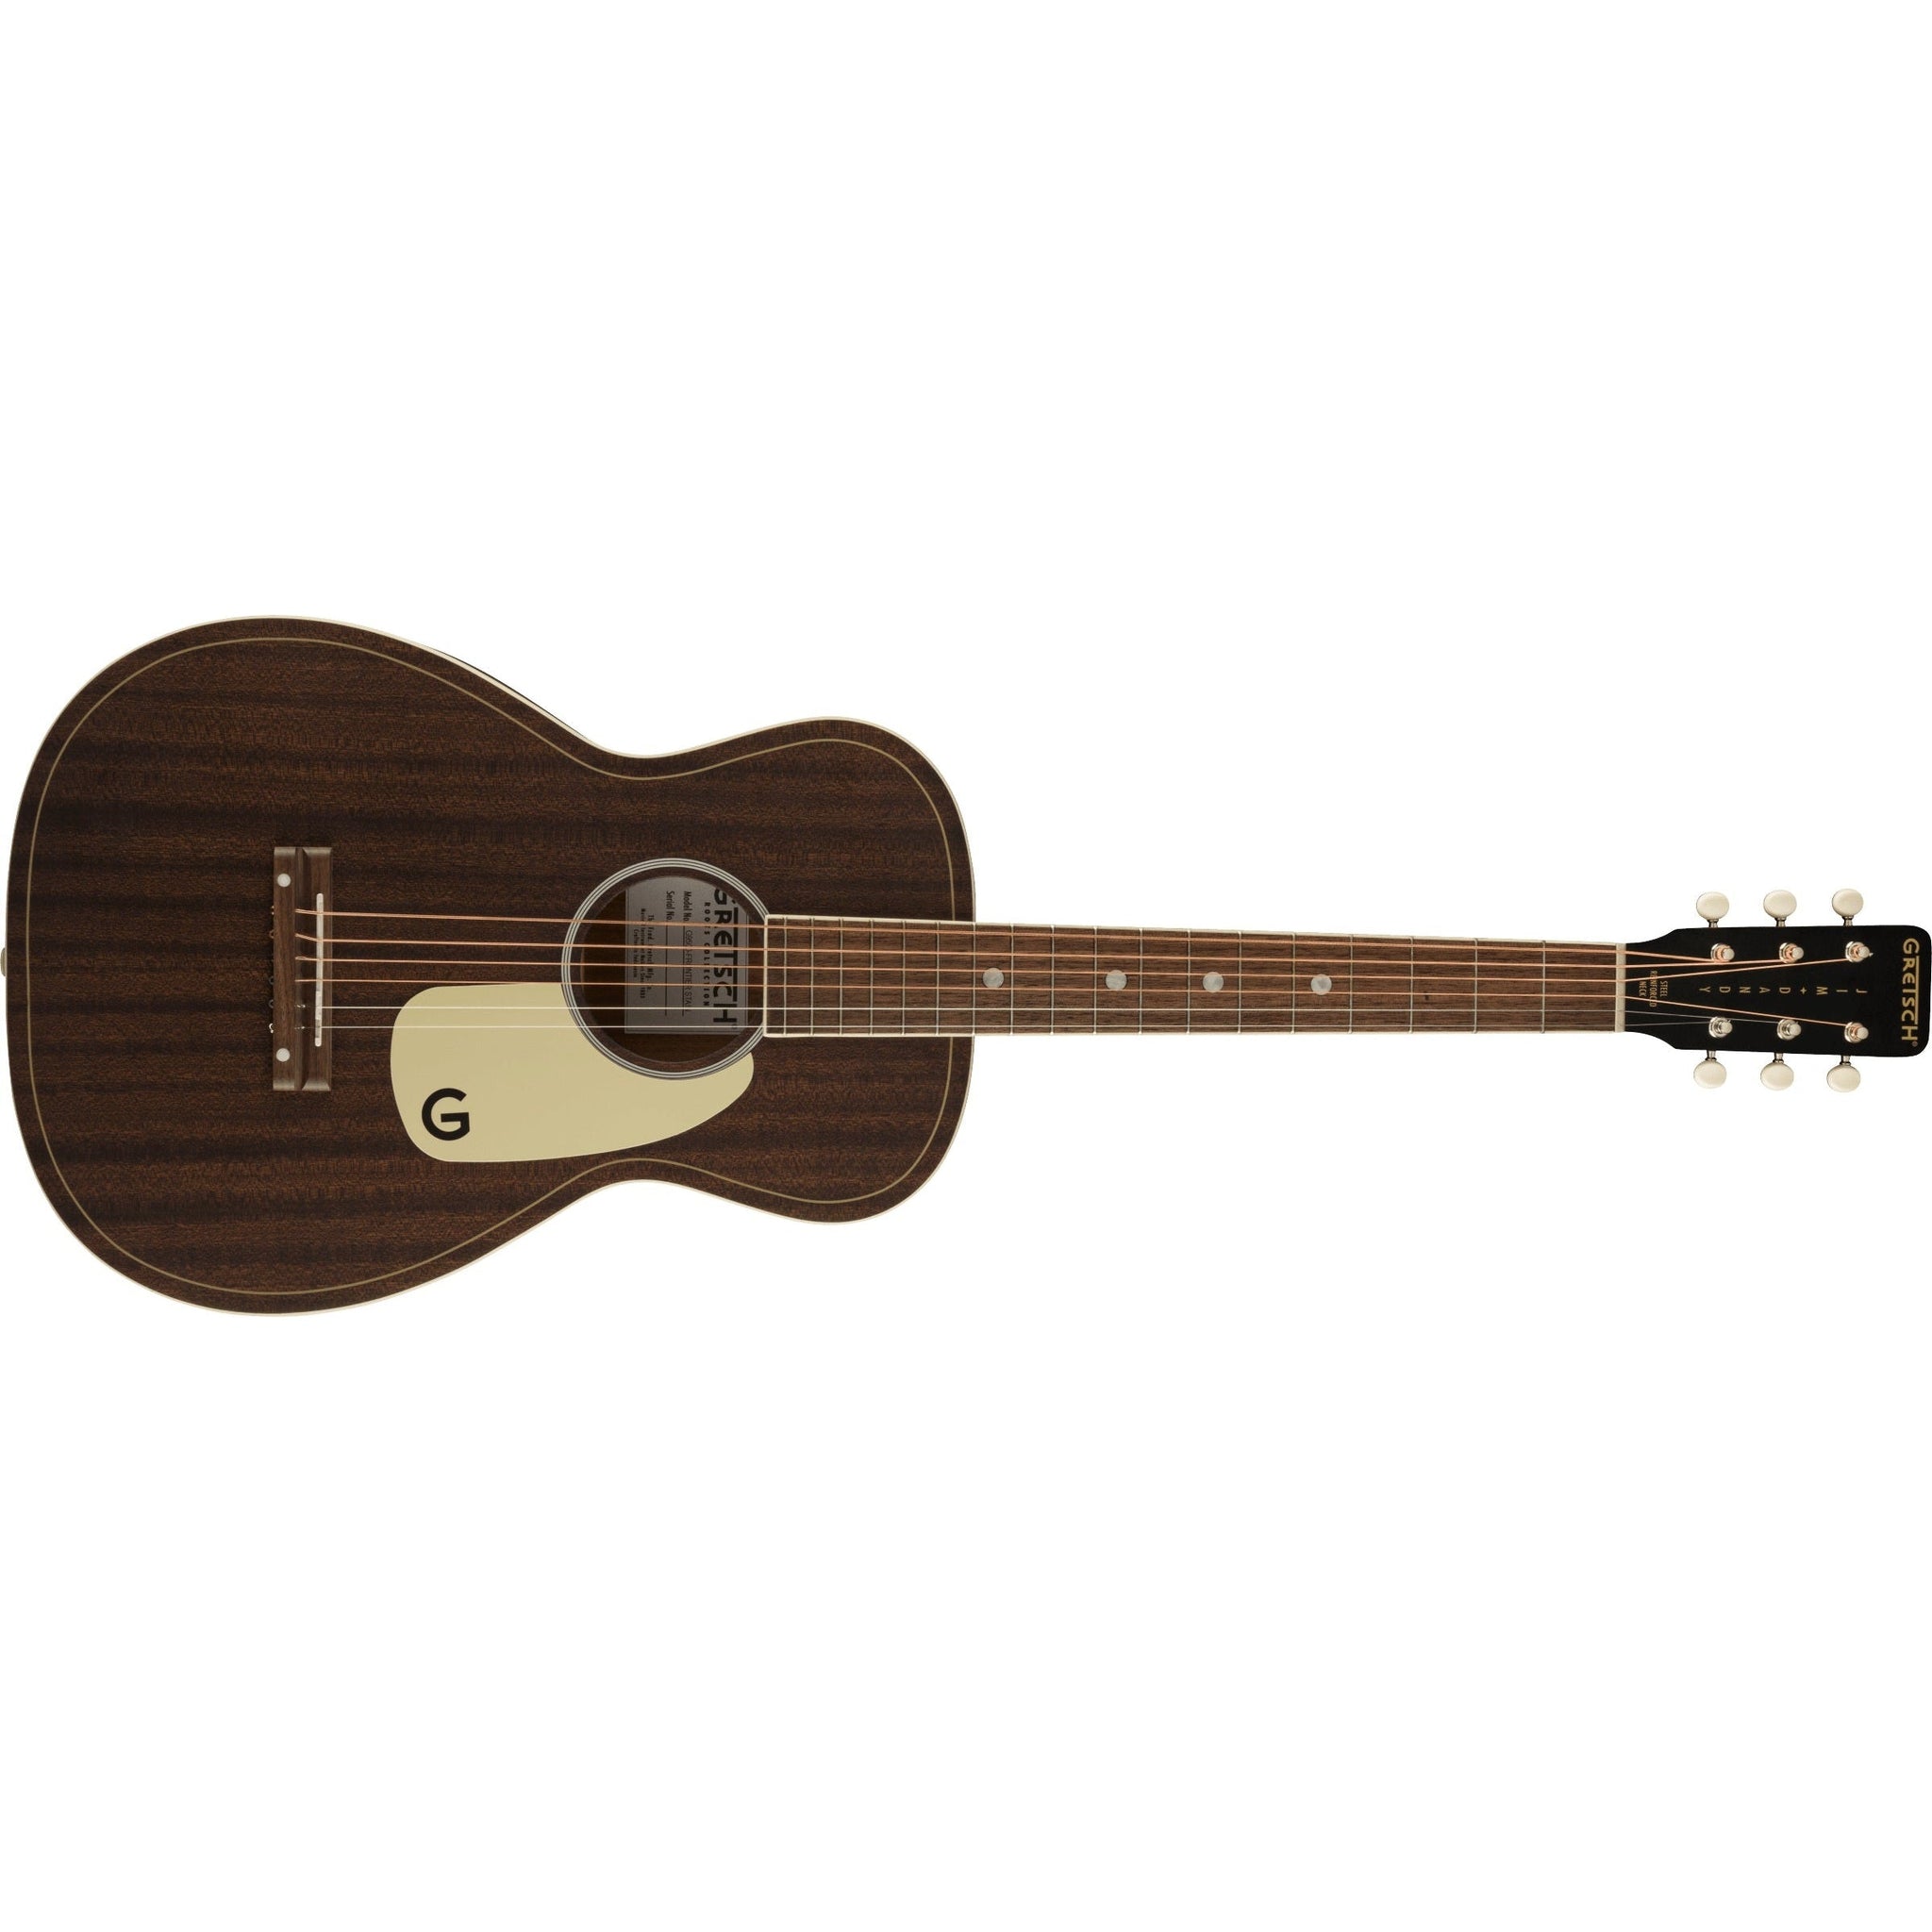 Gretsch G9500 Roots Collection Jim Dandy 24" Flat Top Acoustic Parlor Guitar-Frontier Stain-Music World Academy